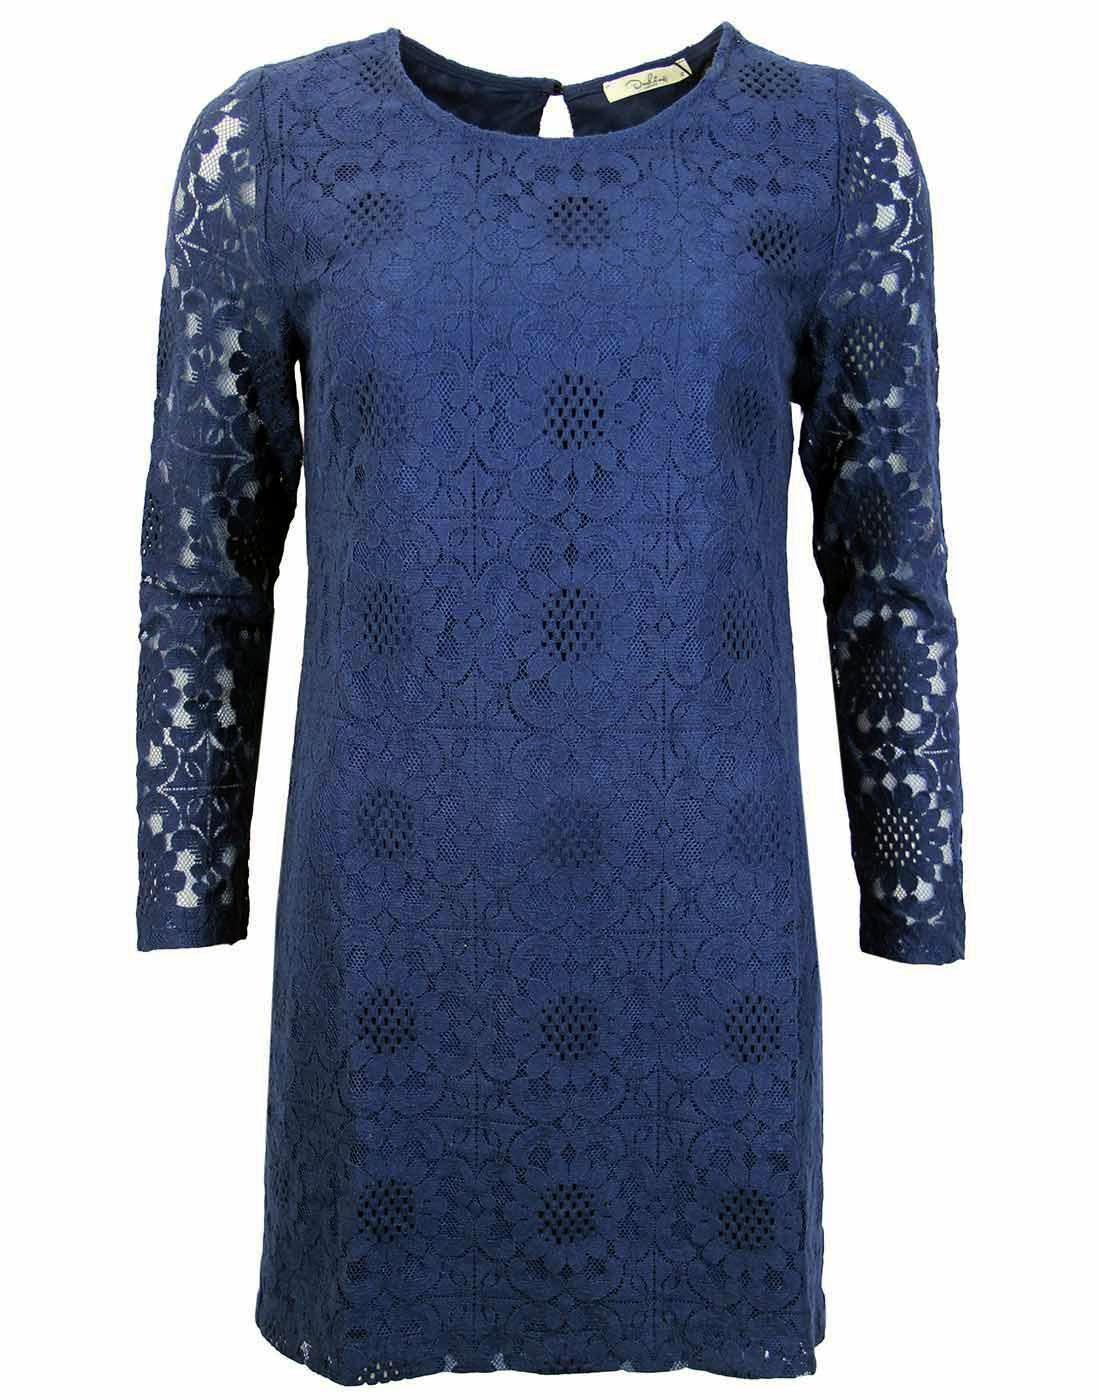 DARLING Erin Retro 60's Floral Lace Panelled Tunic Dress in Navy